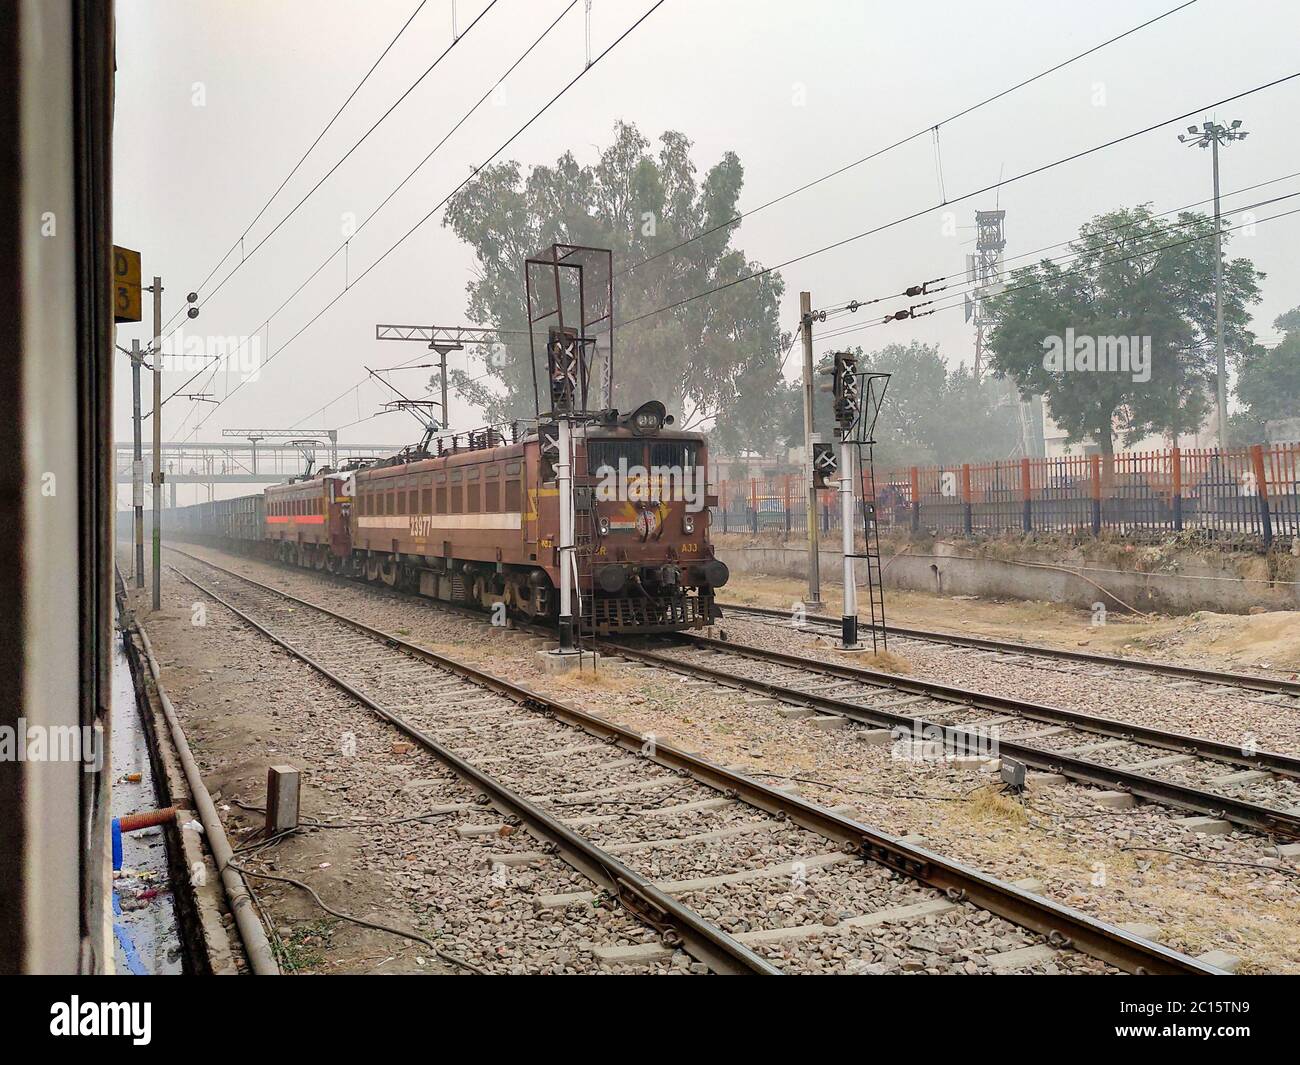 Editorial. Dated-18th April 2020, location - New Delhi.An Indian Frieght train. A forward view of outside the train door. Stock Photo